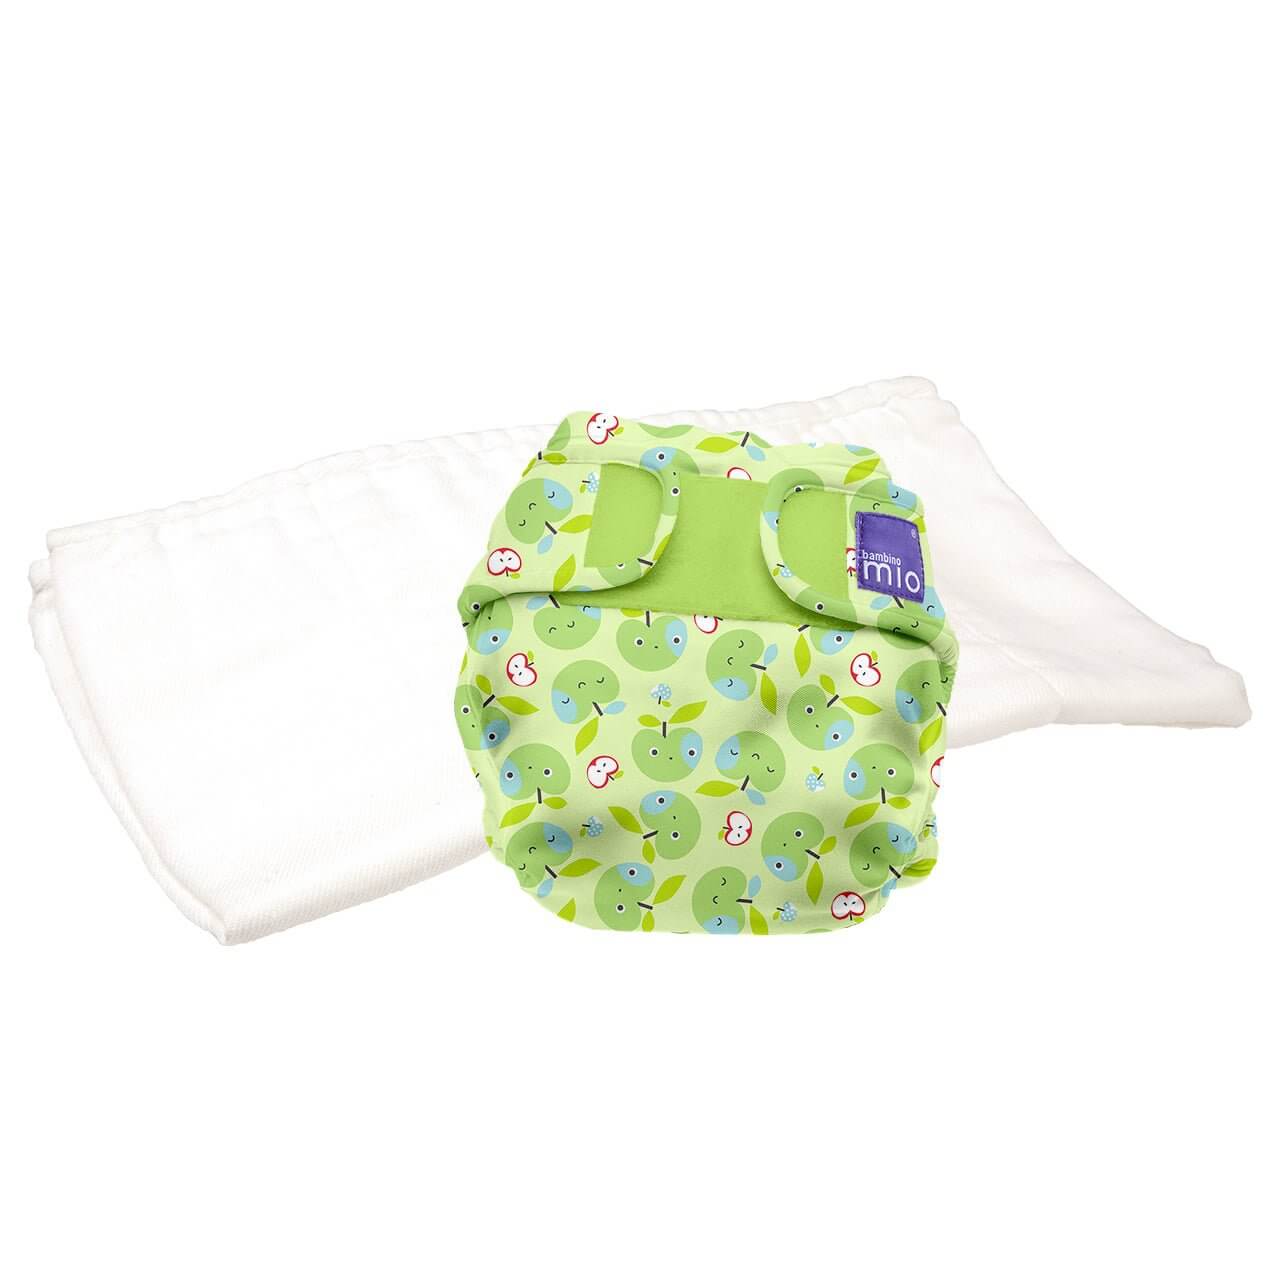 Bambino Mio Mioduo Two-Piece Nappy Size: Size 2 Colour: Berry Bounce reusable nappies Earthlets